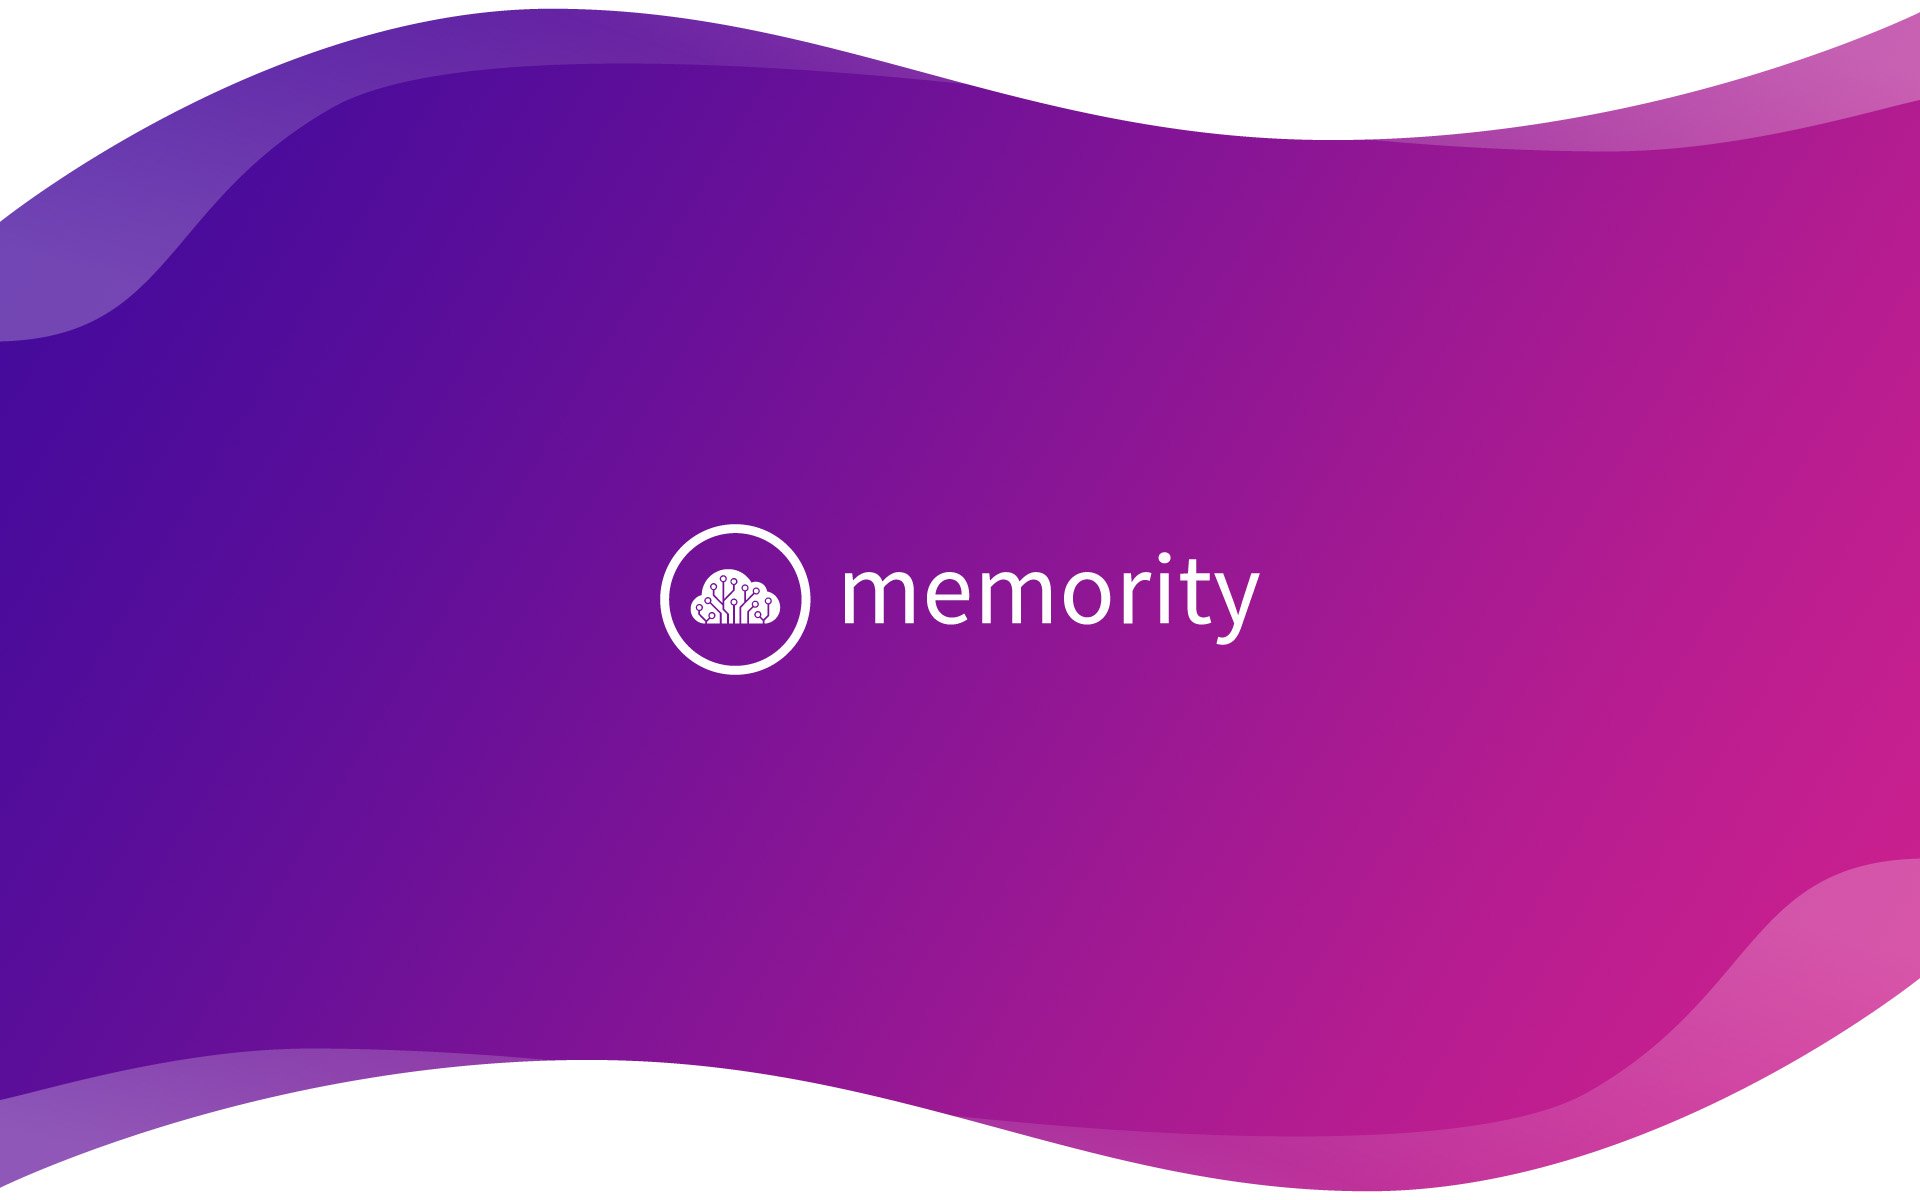 Memority.io Announces ICO Pre-Sale On The Heels Of Successful Release Of Revolutionary Ultra-Secure Data Storage Platform Built On The Blockchain